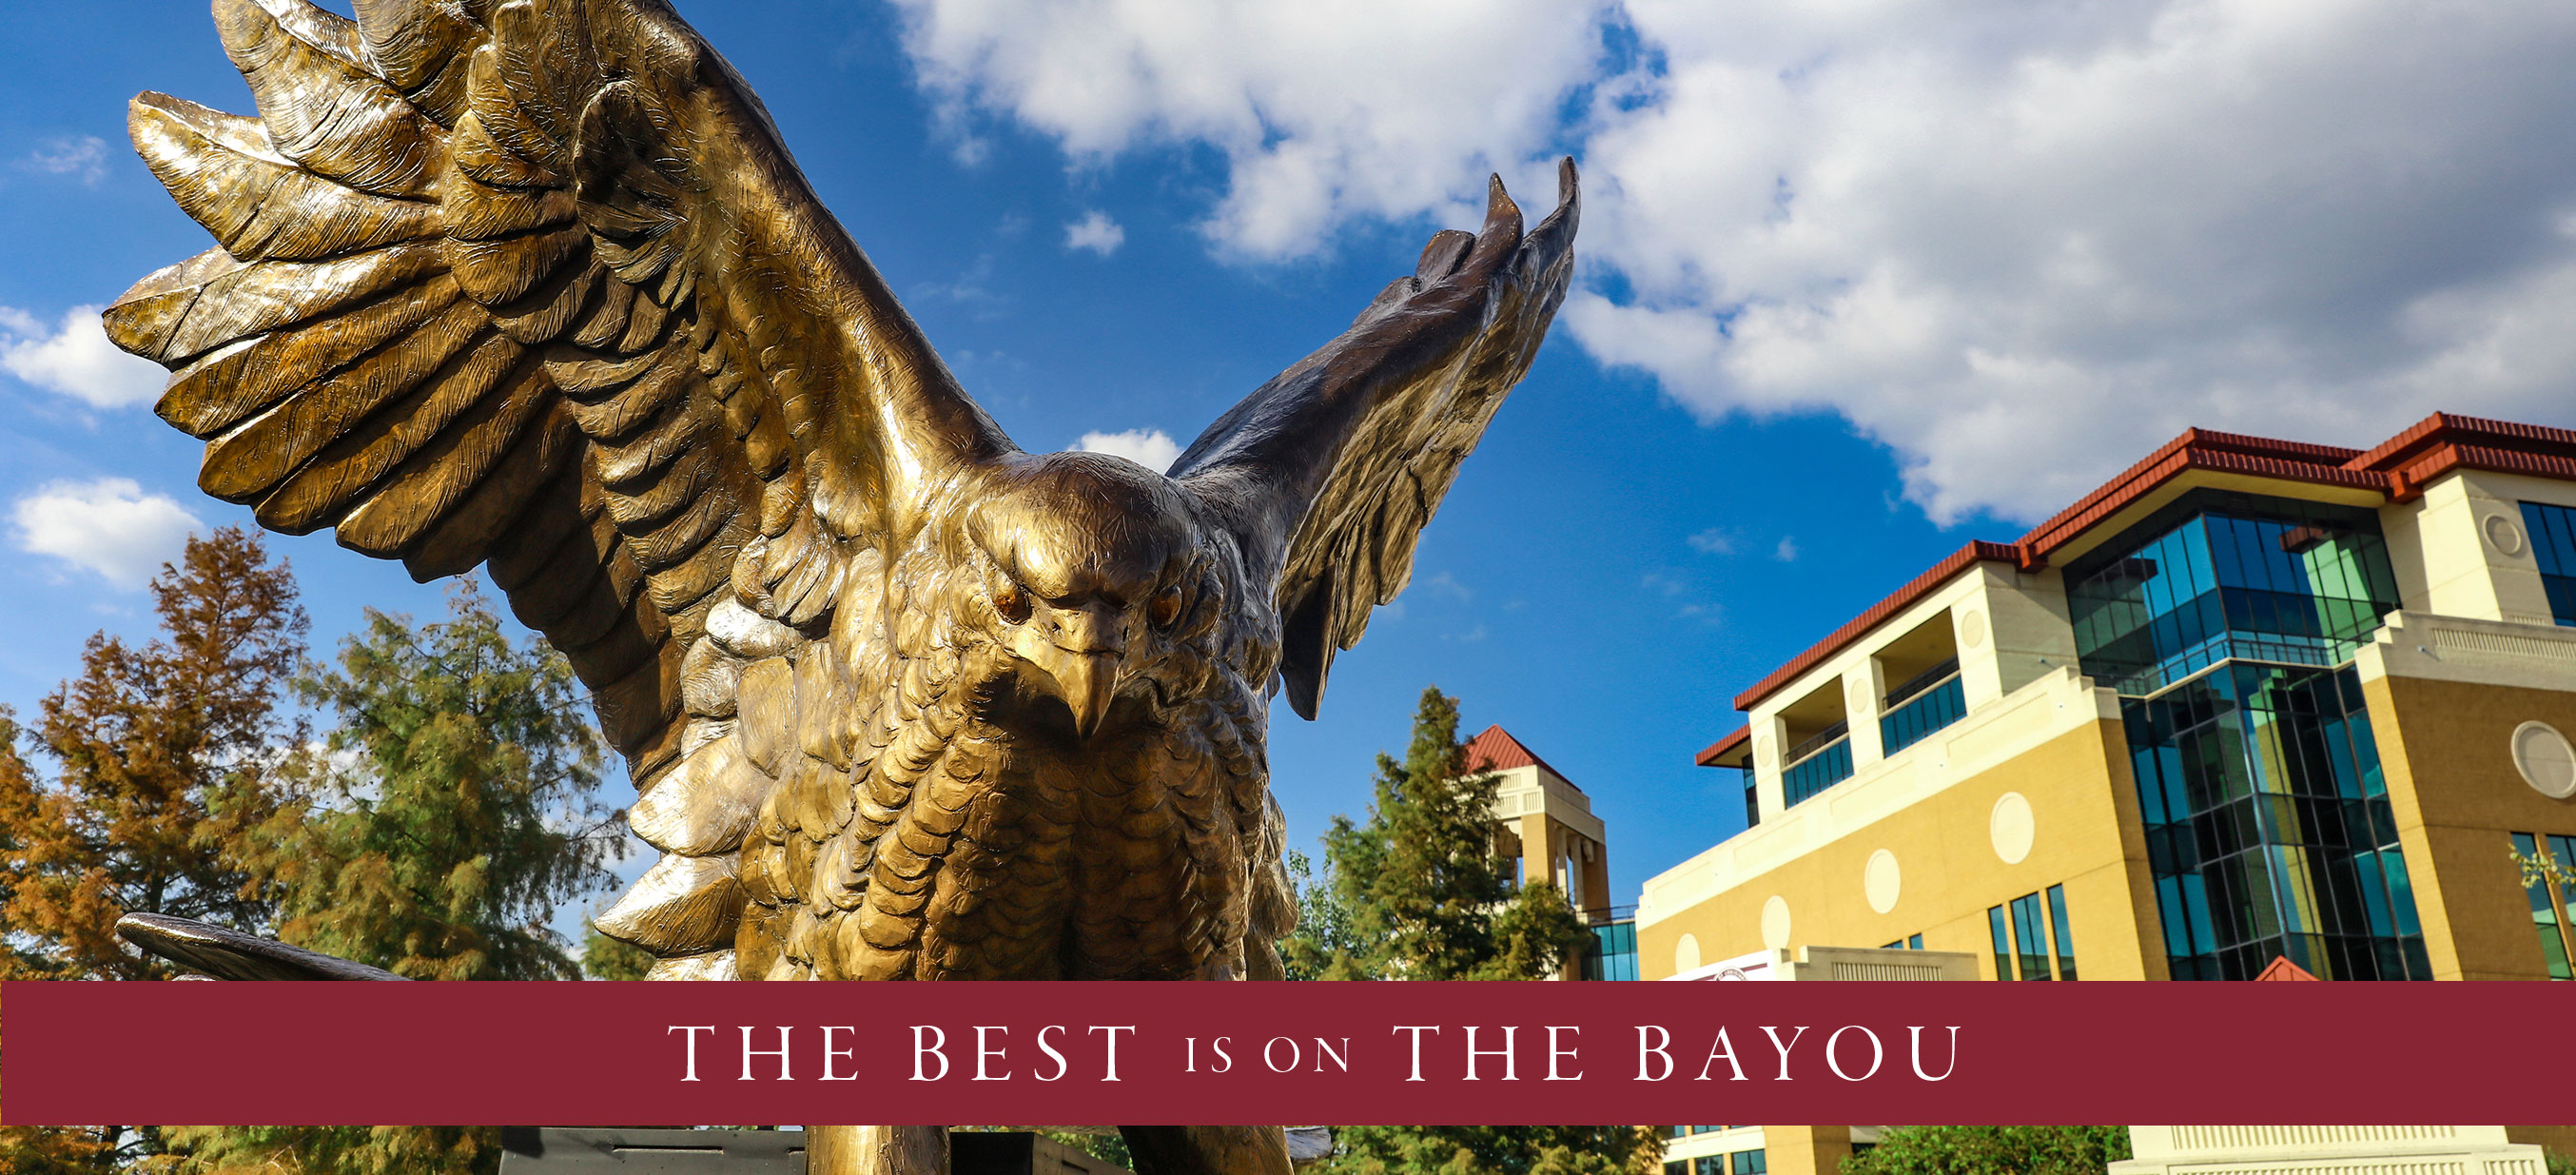 The Best is on the Bayou!